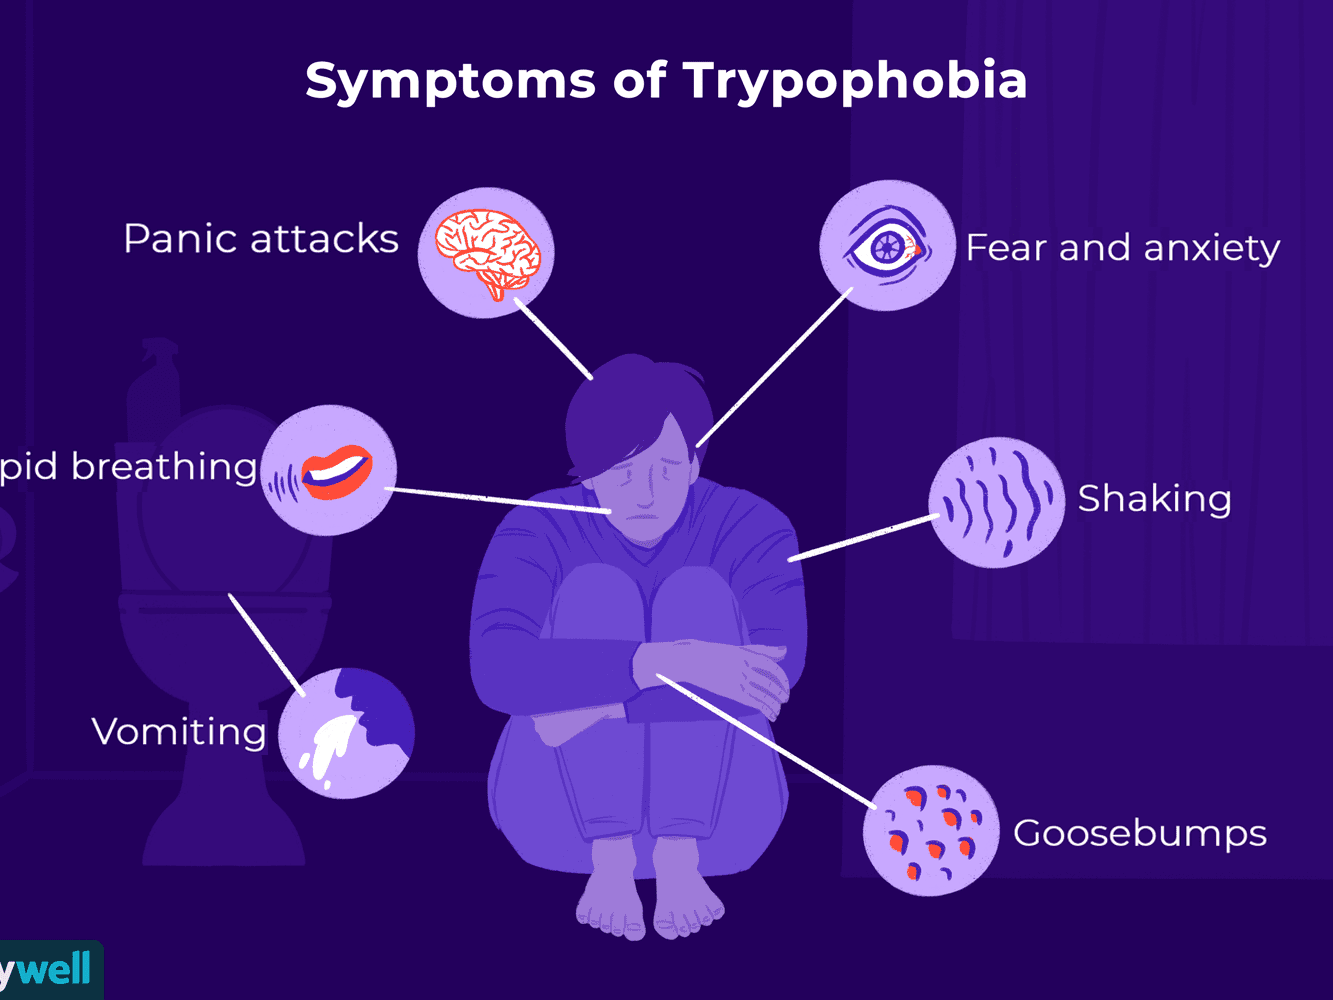 Symptoms and Treatments of Trypophobia